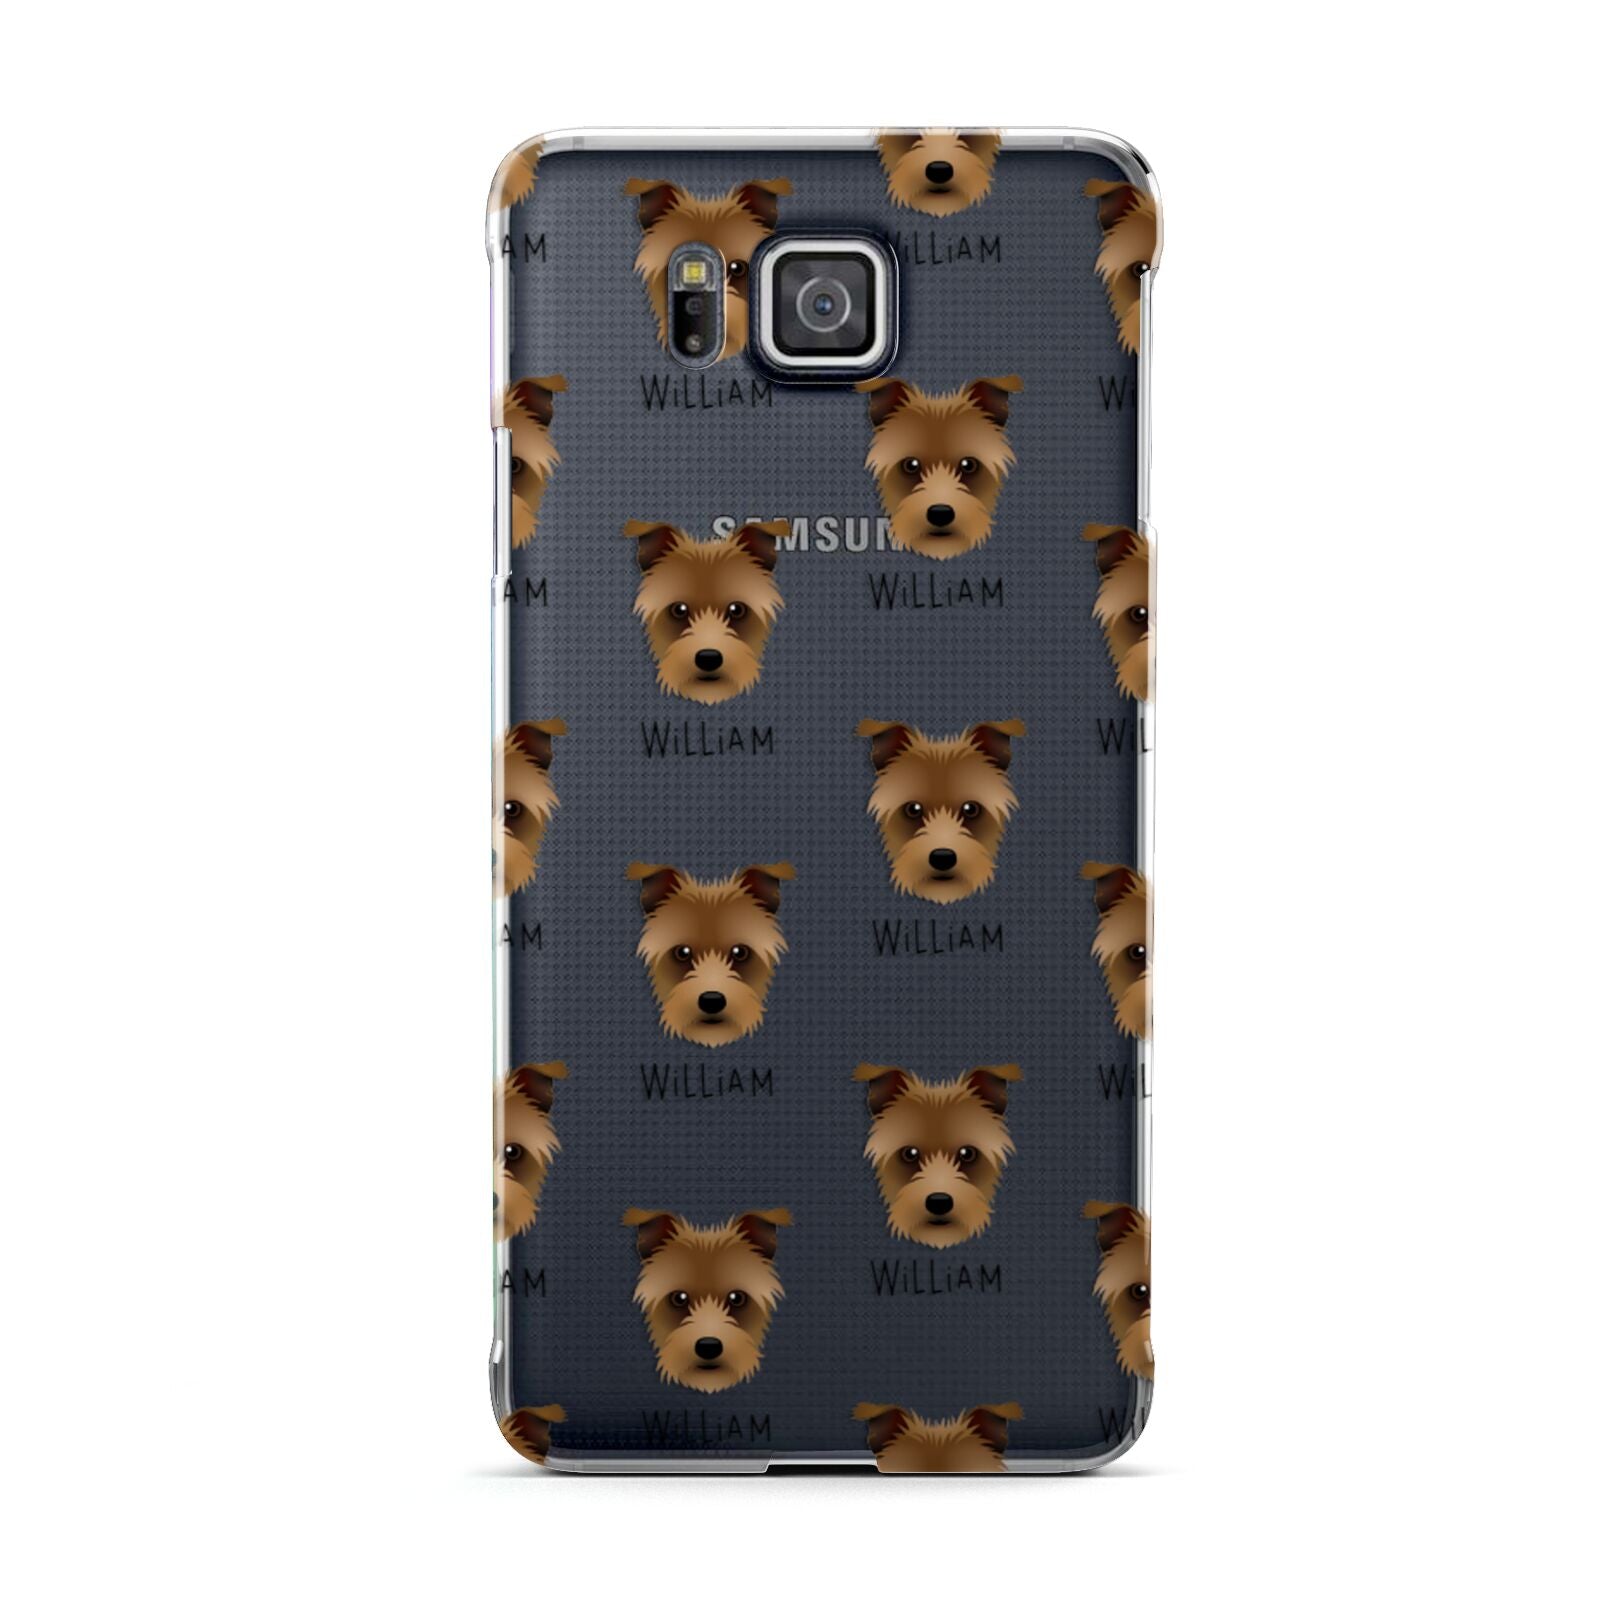 Sporting Lucas Terrier Icon with Name Samsung Galaxy Alpha Case